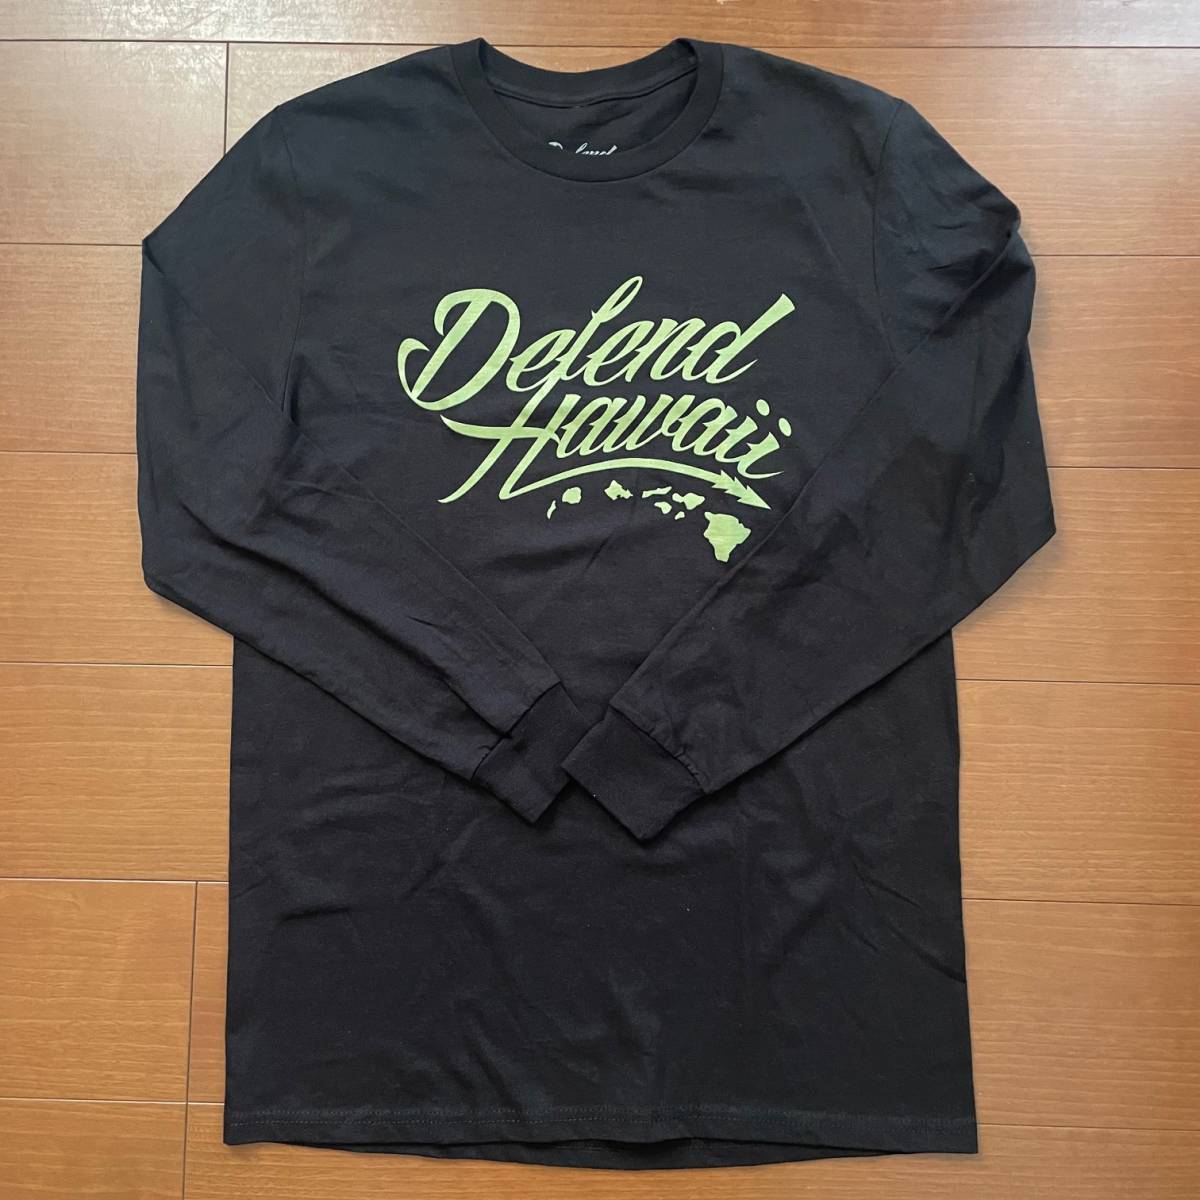 DEFEND HAWAII ディフェンドハワイ ロゴ ロングスリーブ ロンT Tシャツ HAWAII'S FINEST FITTED HILIFE IN4MATION 808ALLDAY USDM HDM 30